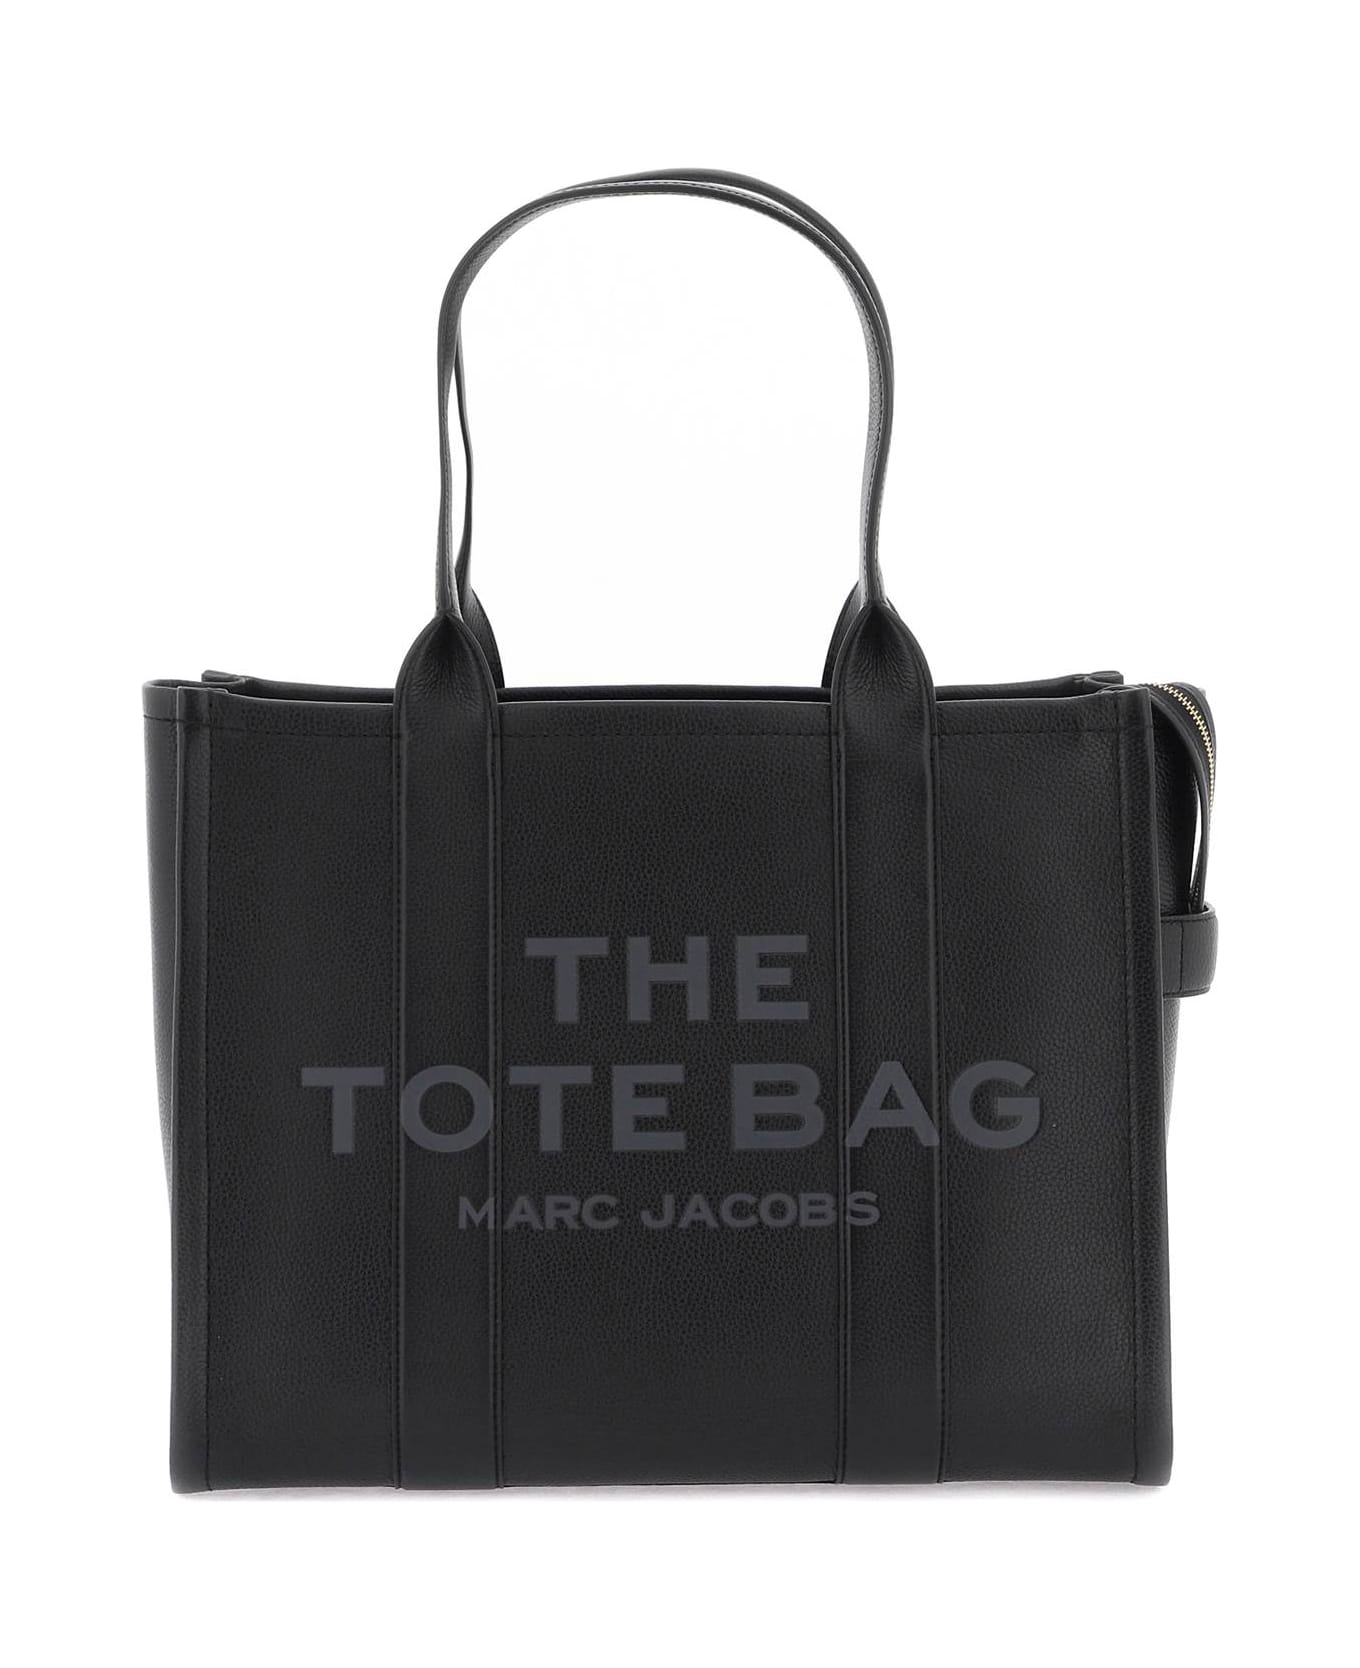 Marc Jacobs The Leather Large Tote Bag - BLACK (Black)